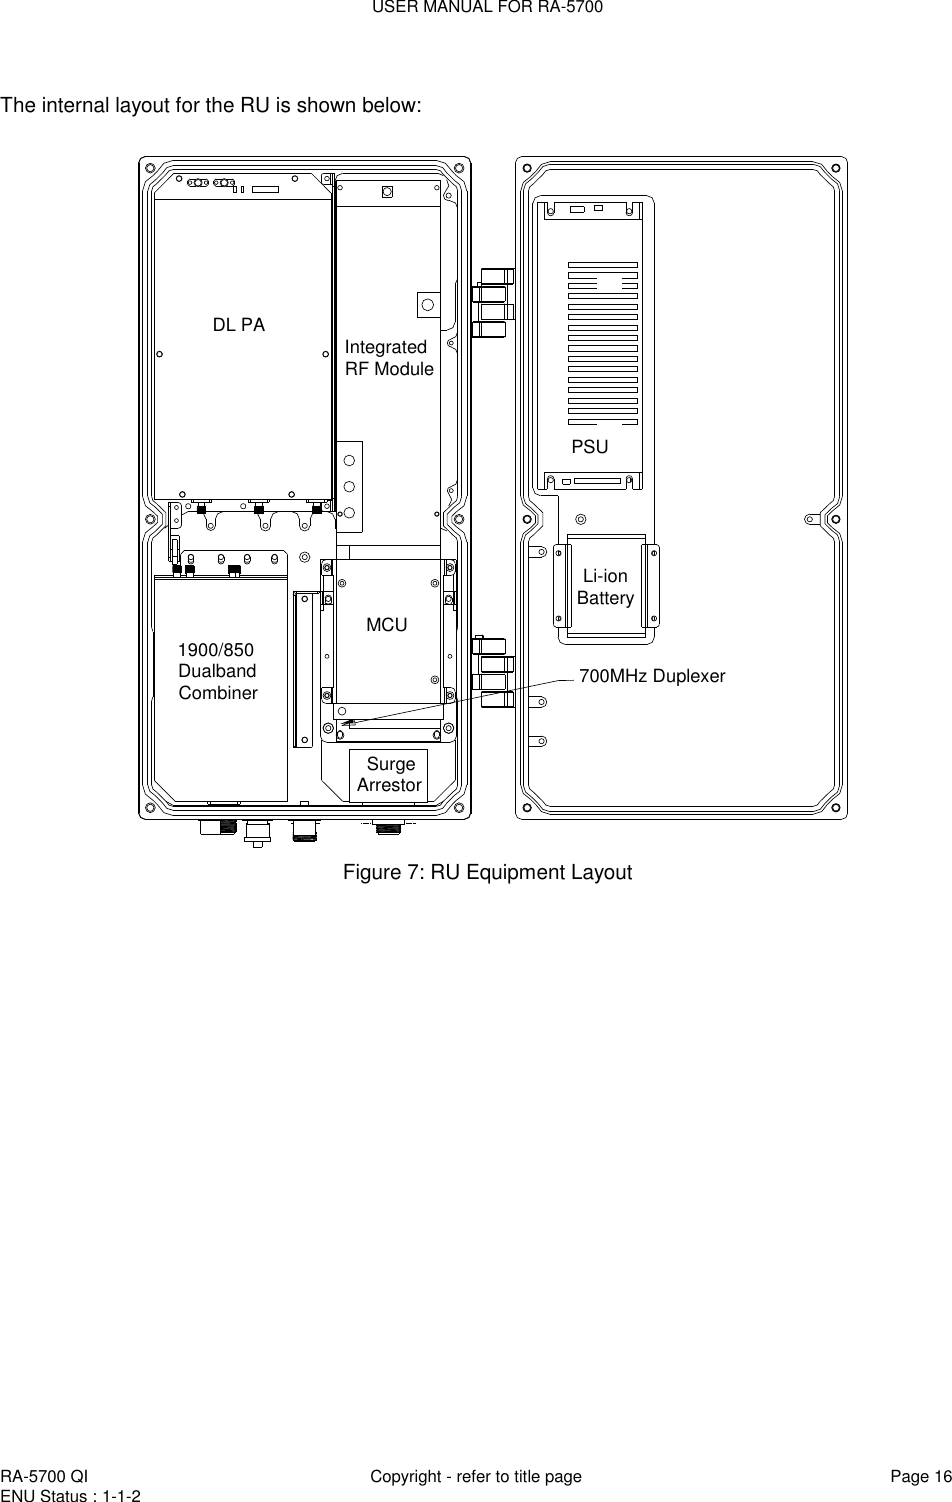 USER MANUAL FOR RA-5700  RA-5700 QI  Copyright - refer to title page Page 16 ENU Status : 1-1-2     The internal layout for the RU is shown below:  PSU Li-ion Battery Integrated RF ModuleDL PA1900/850 Dualband CombinerMCU  Surge Arrestor700MHz Duplexer Figure 7: RU Equipment Layout  